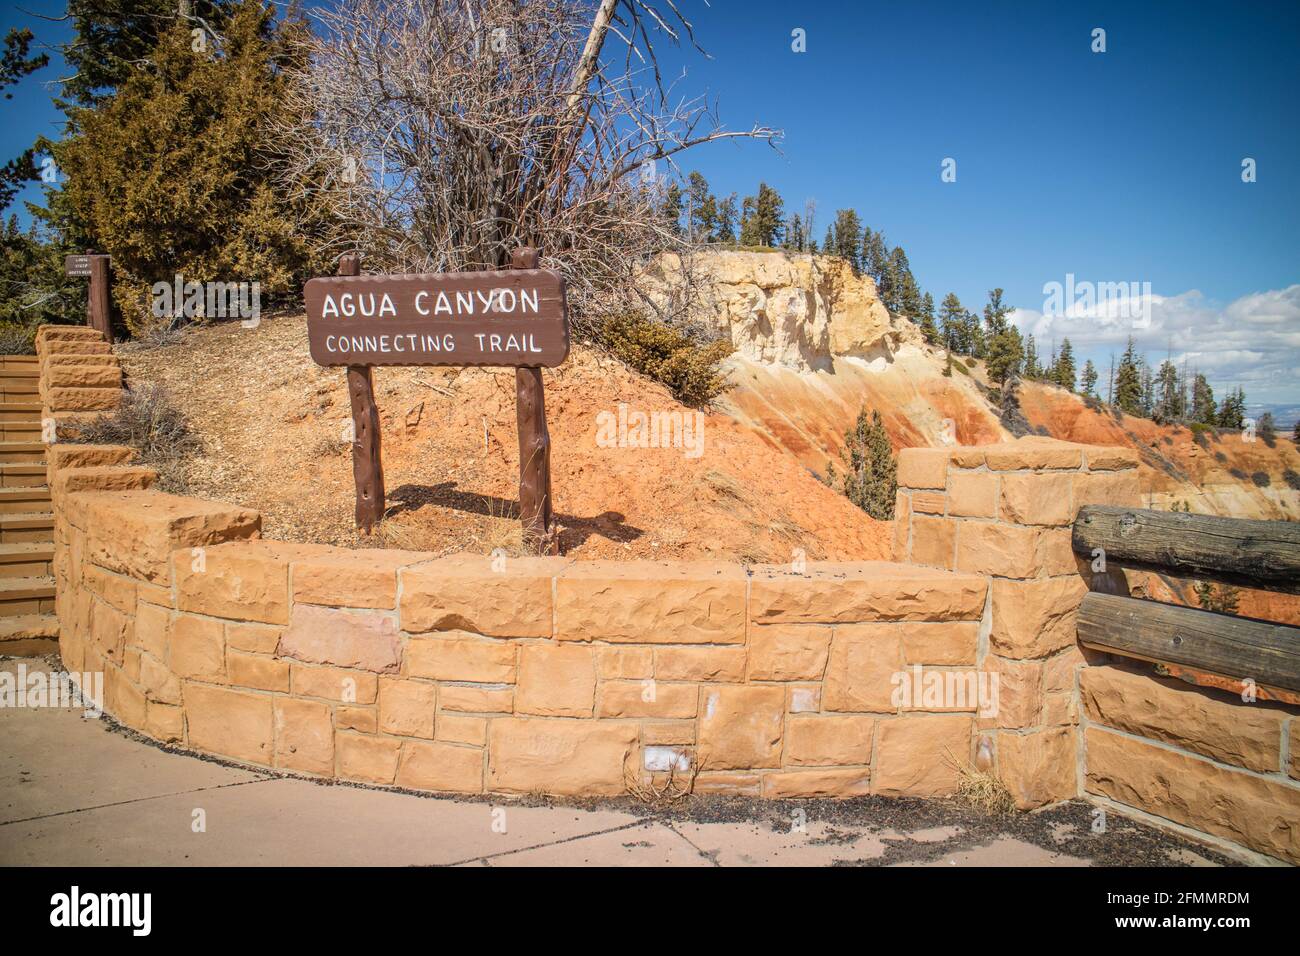 Bryce Canyon National Park, UT, USA - March 25, 2018: The Agua Canyon Stock Photo